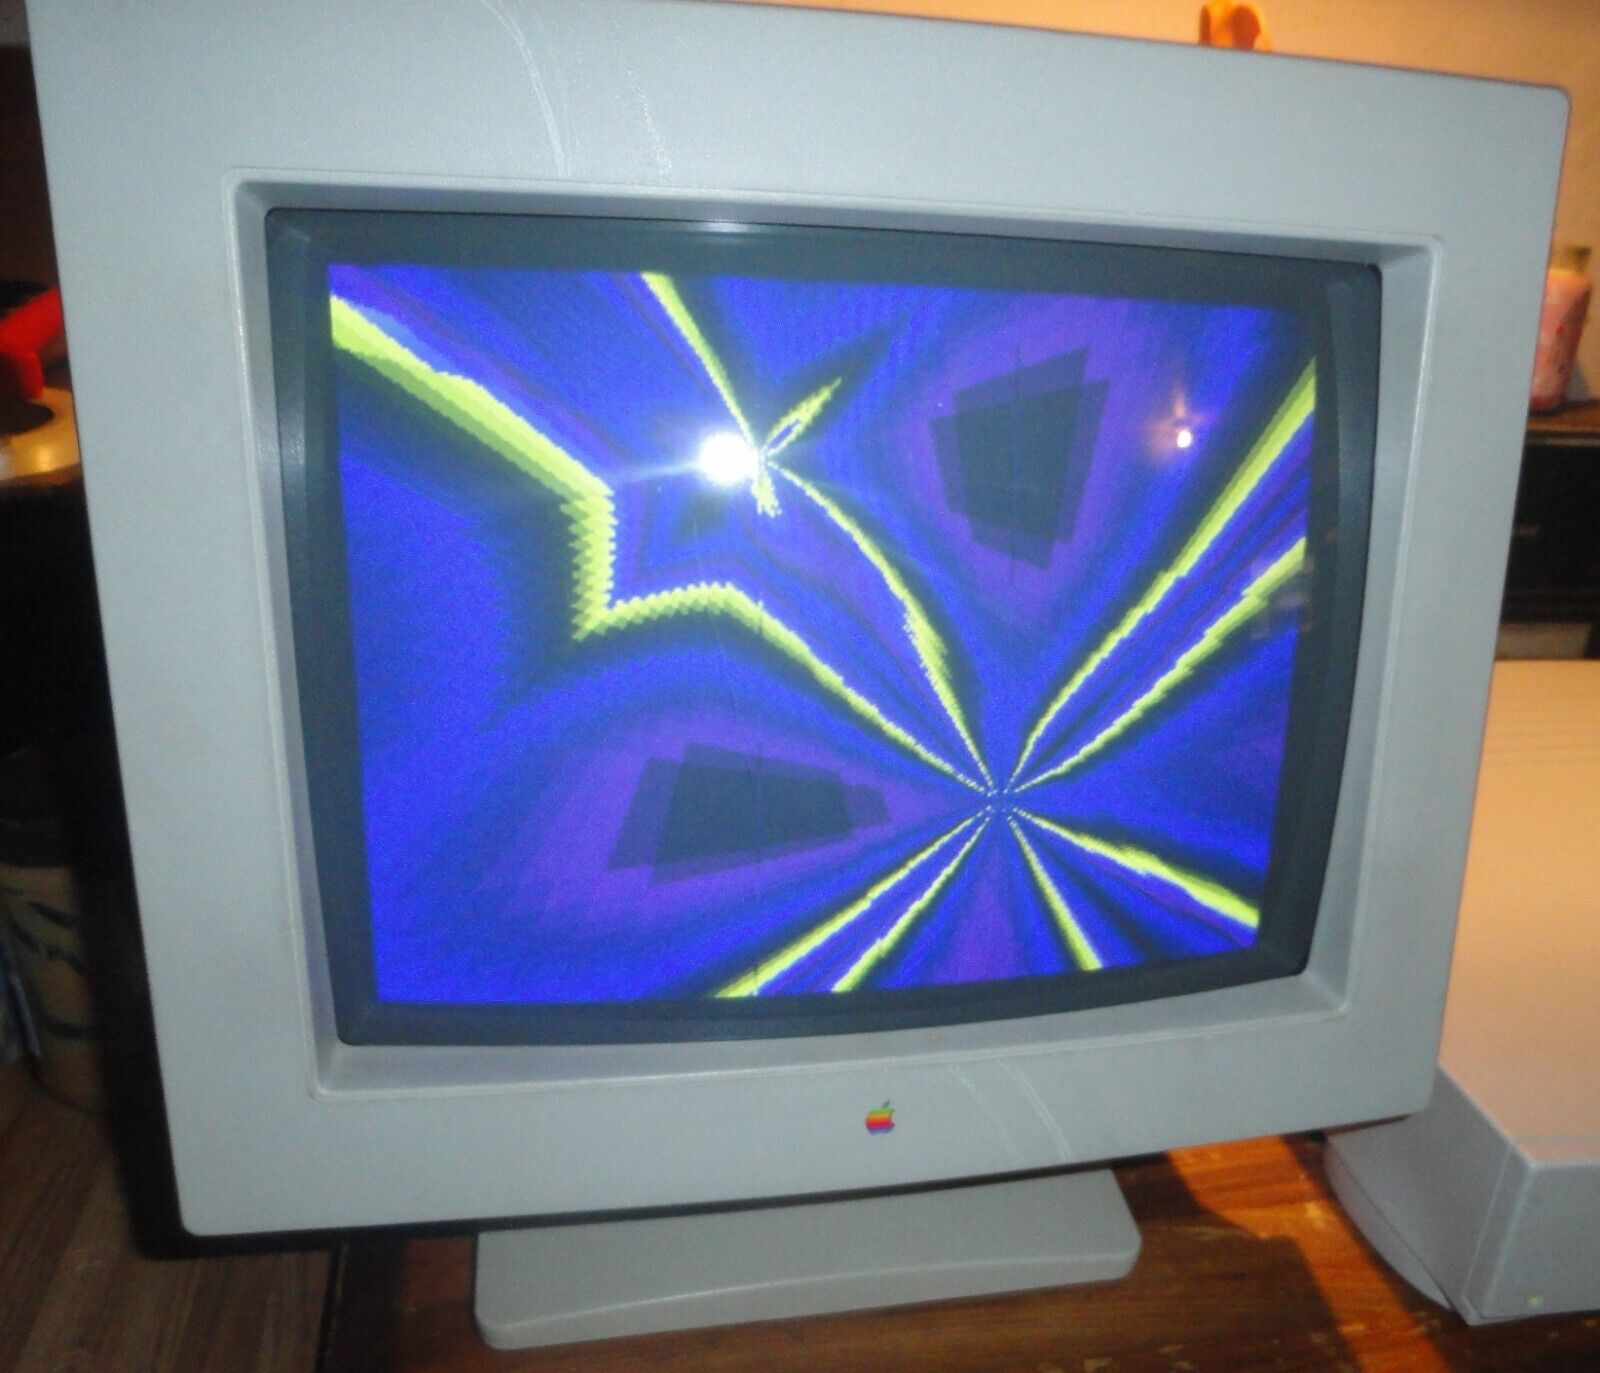 vintage apple macintosh computer m1787 color plus 14 inch monitor only 14